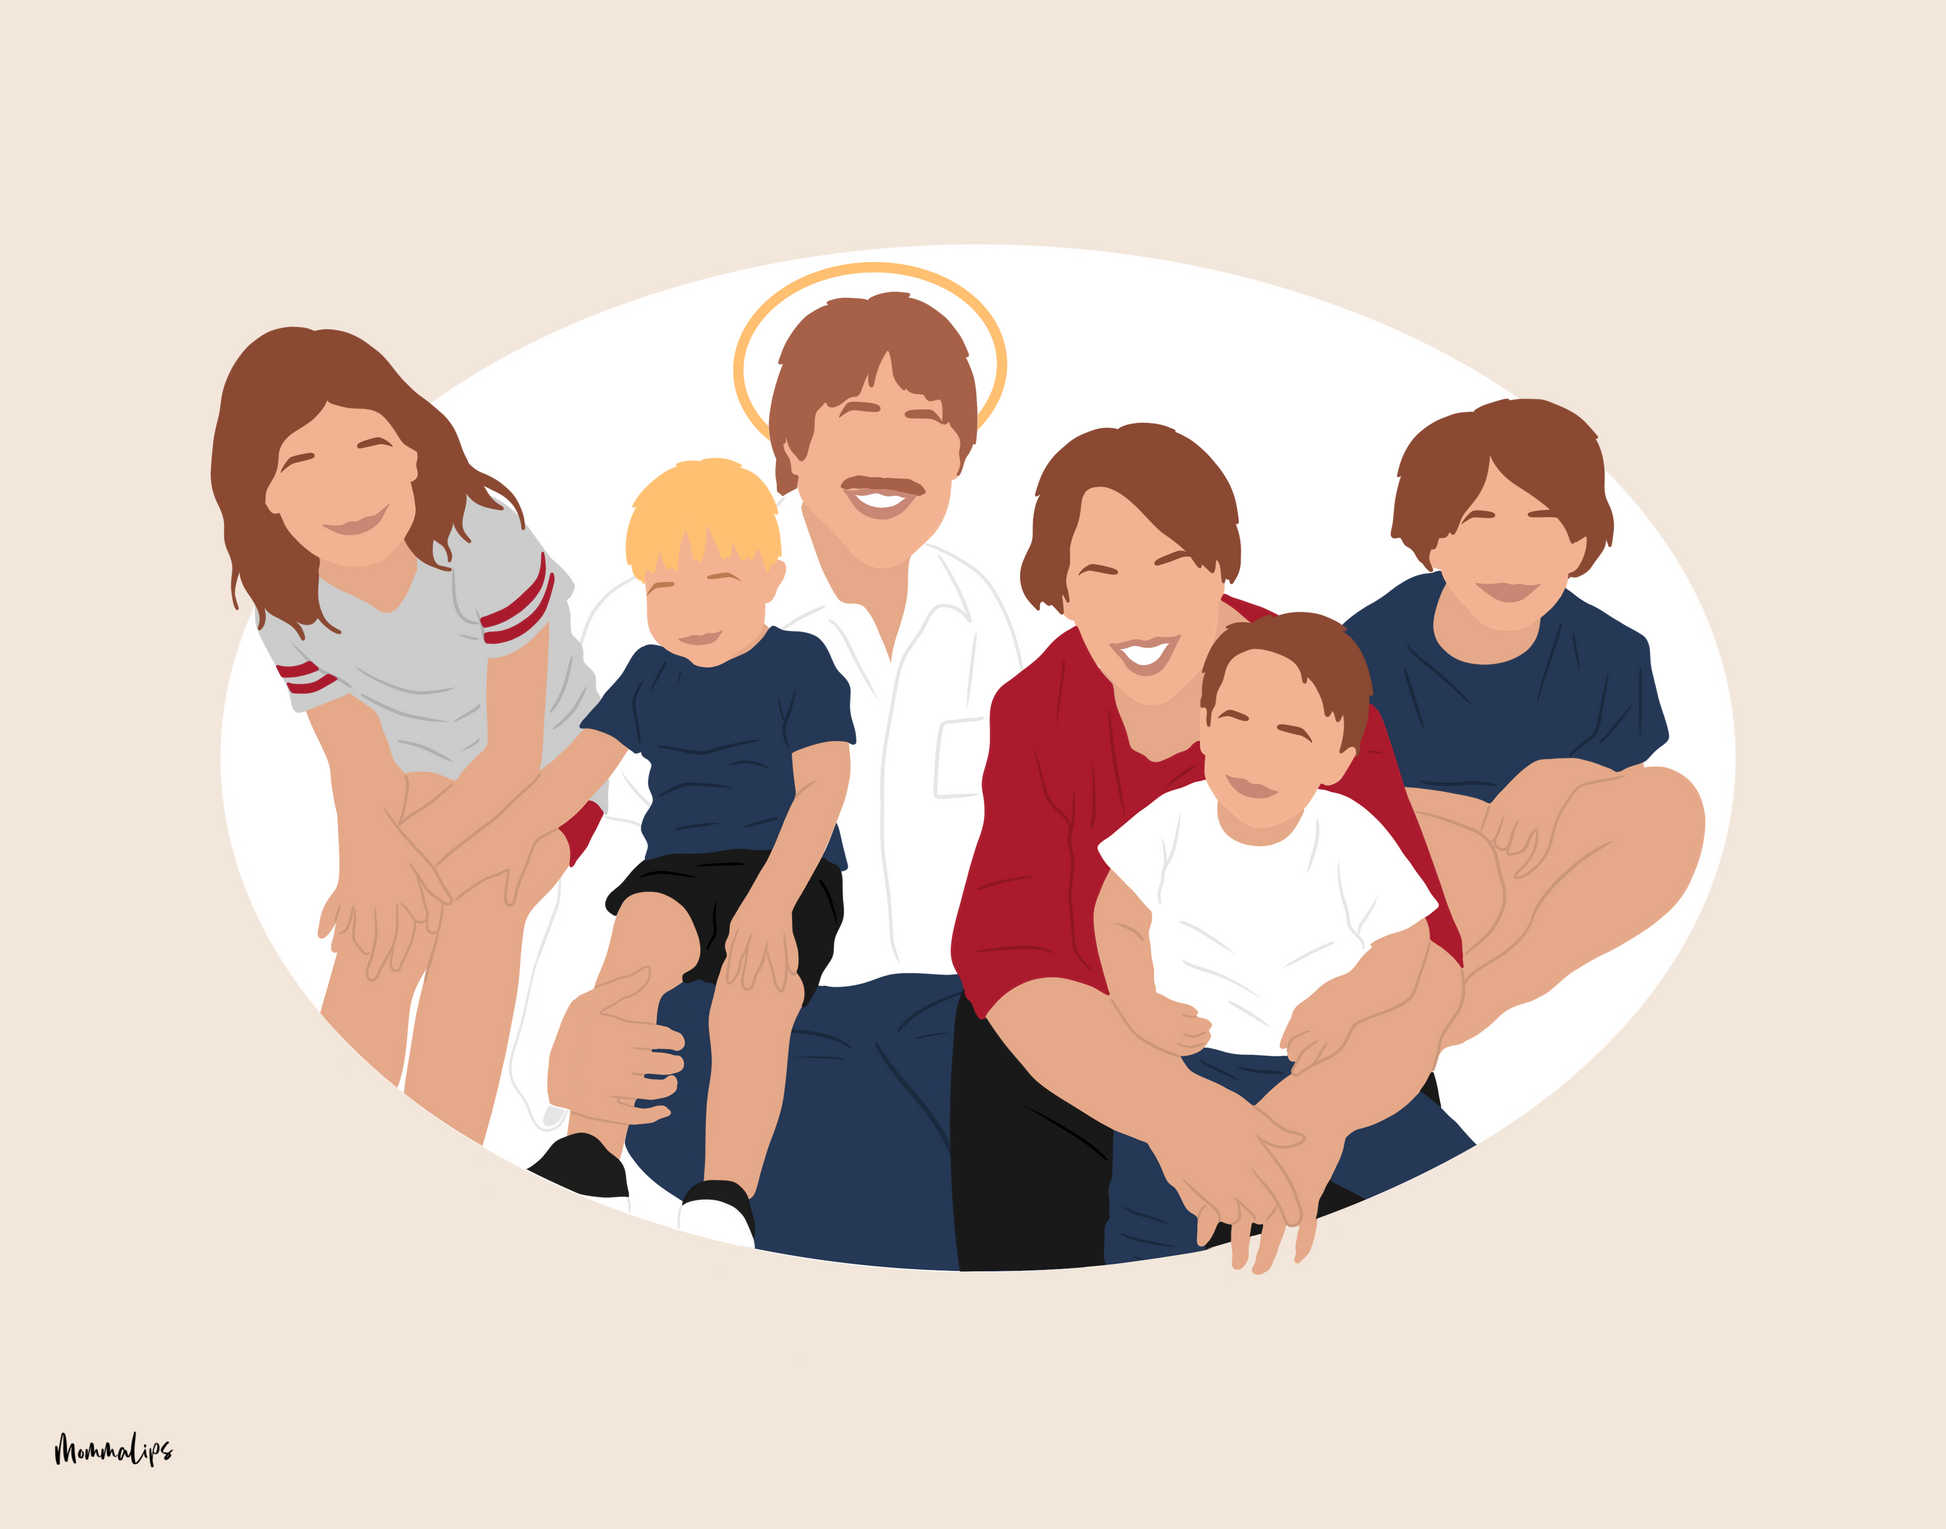 Memorial illustration of grandparents and grandchildren. Added individual in white shirt with halo.